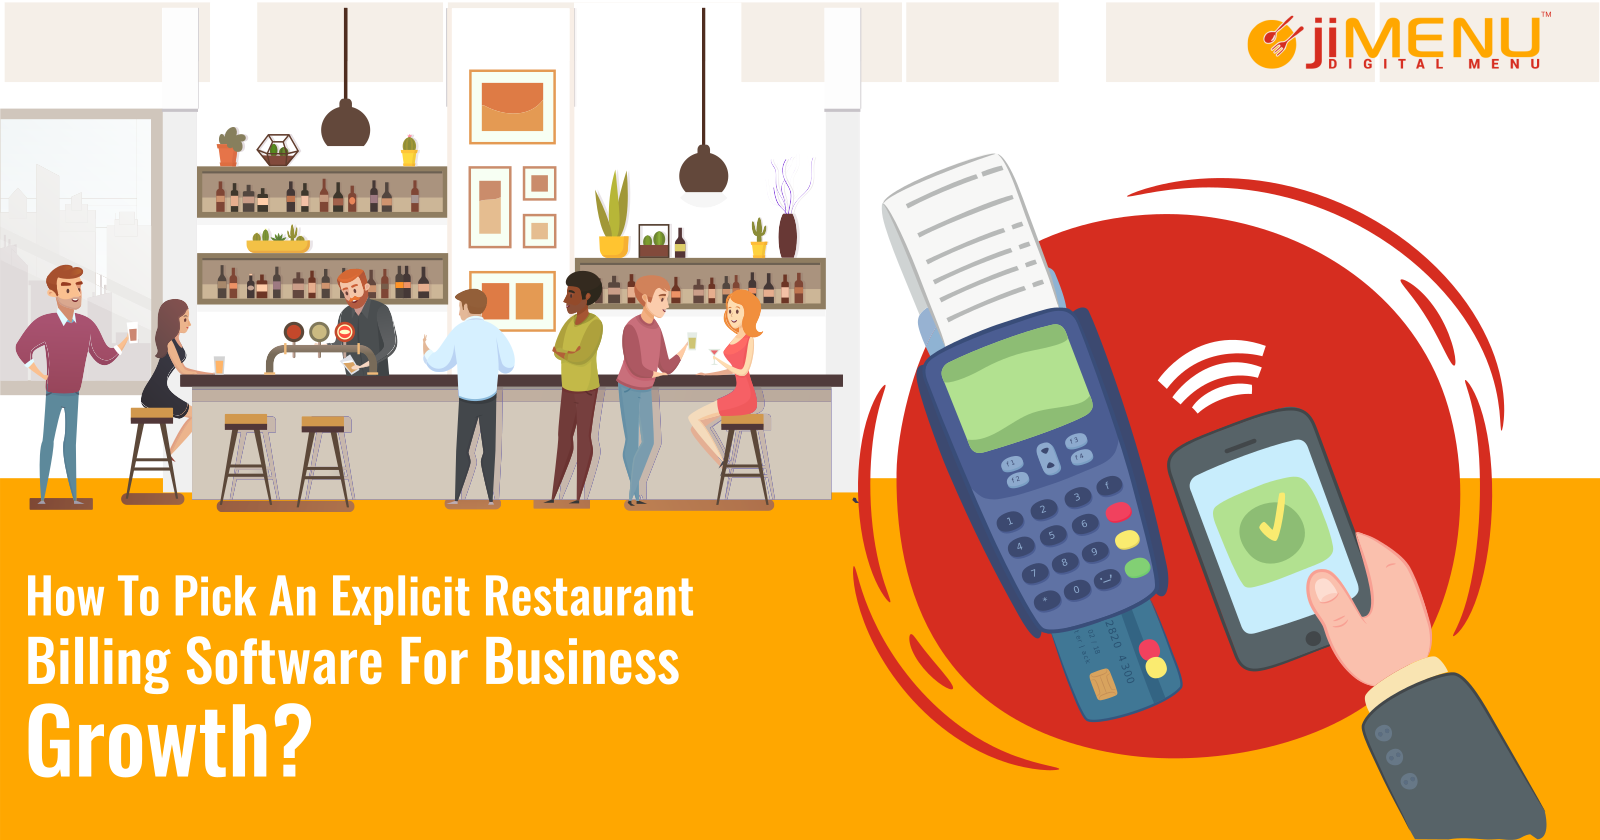 How To Pick An Explicit Restaurant Billing Software For Business Growth